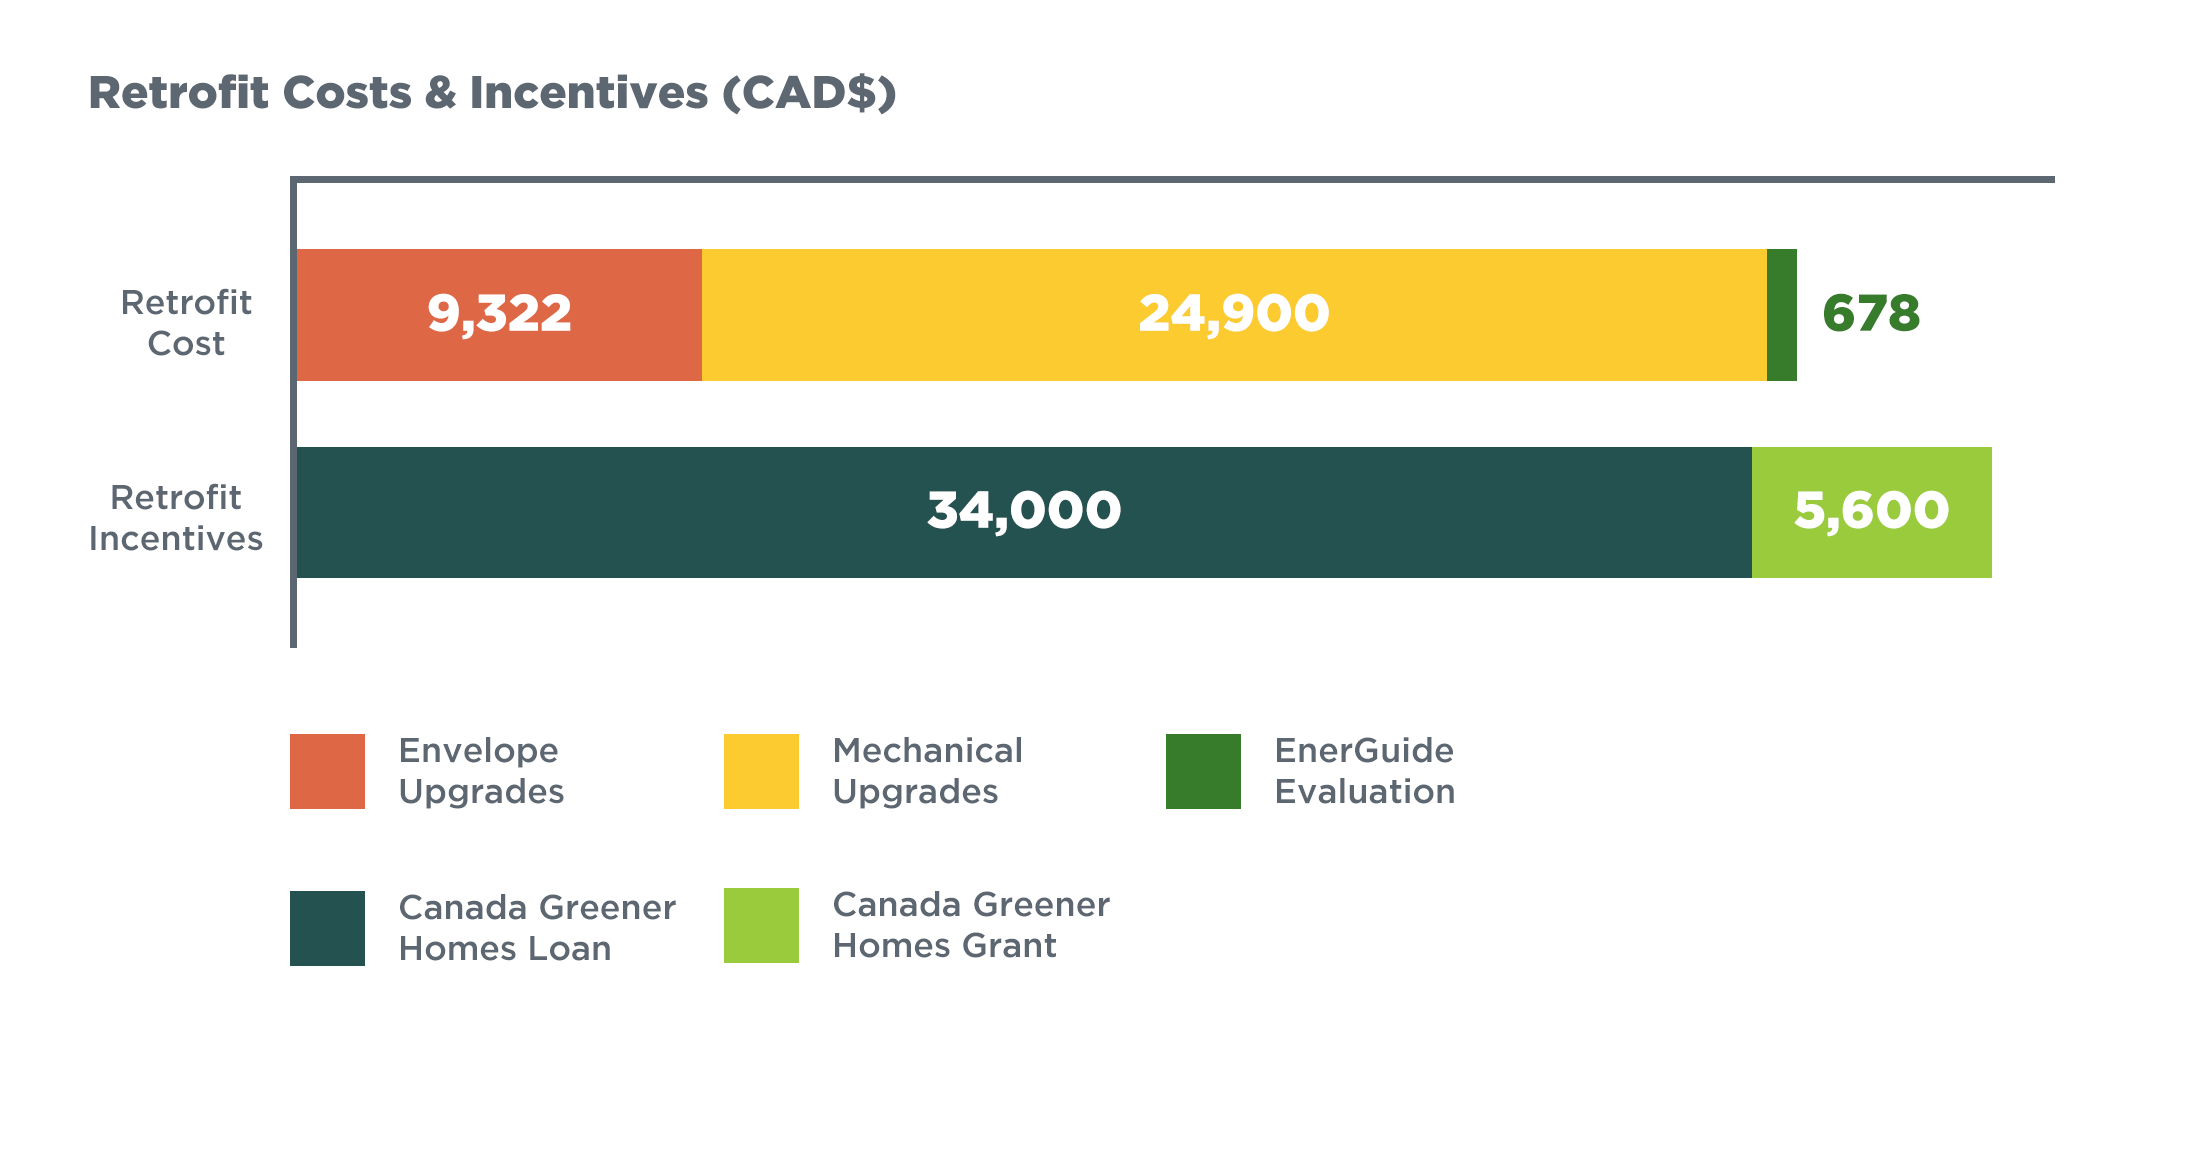 Bar graph showing the cost of the retrofit and the energy efficiency program incentives (loan and rebates) that are helping to offset the costs.